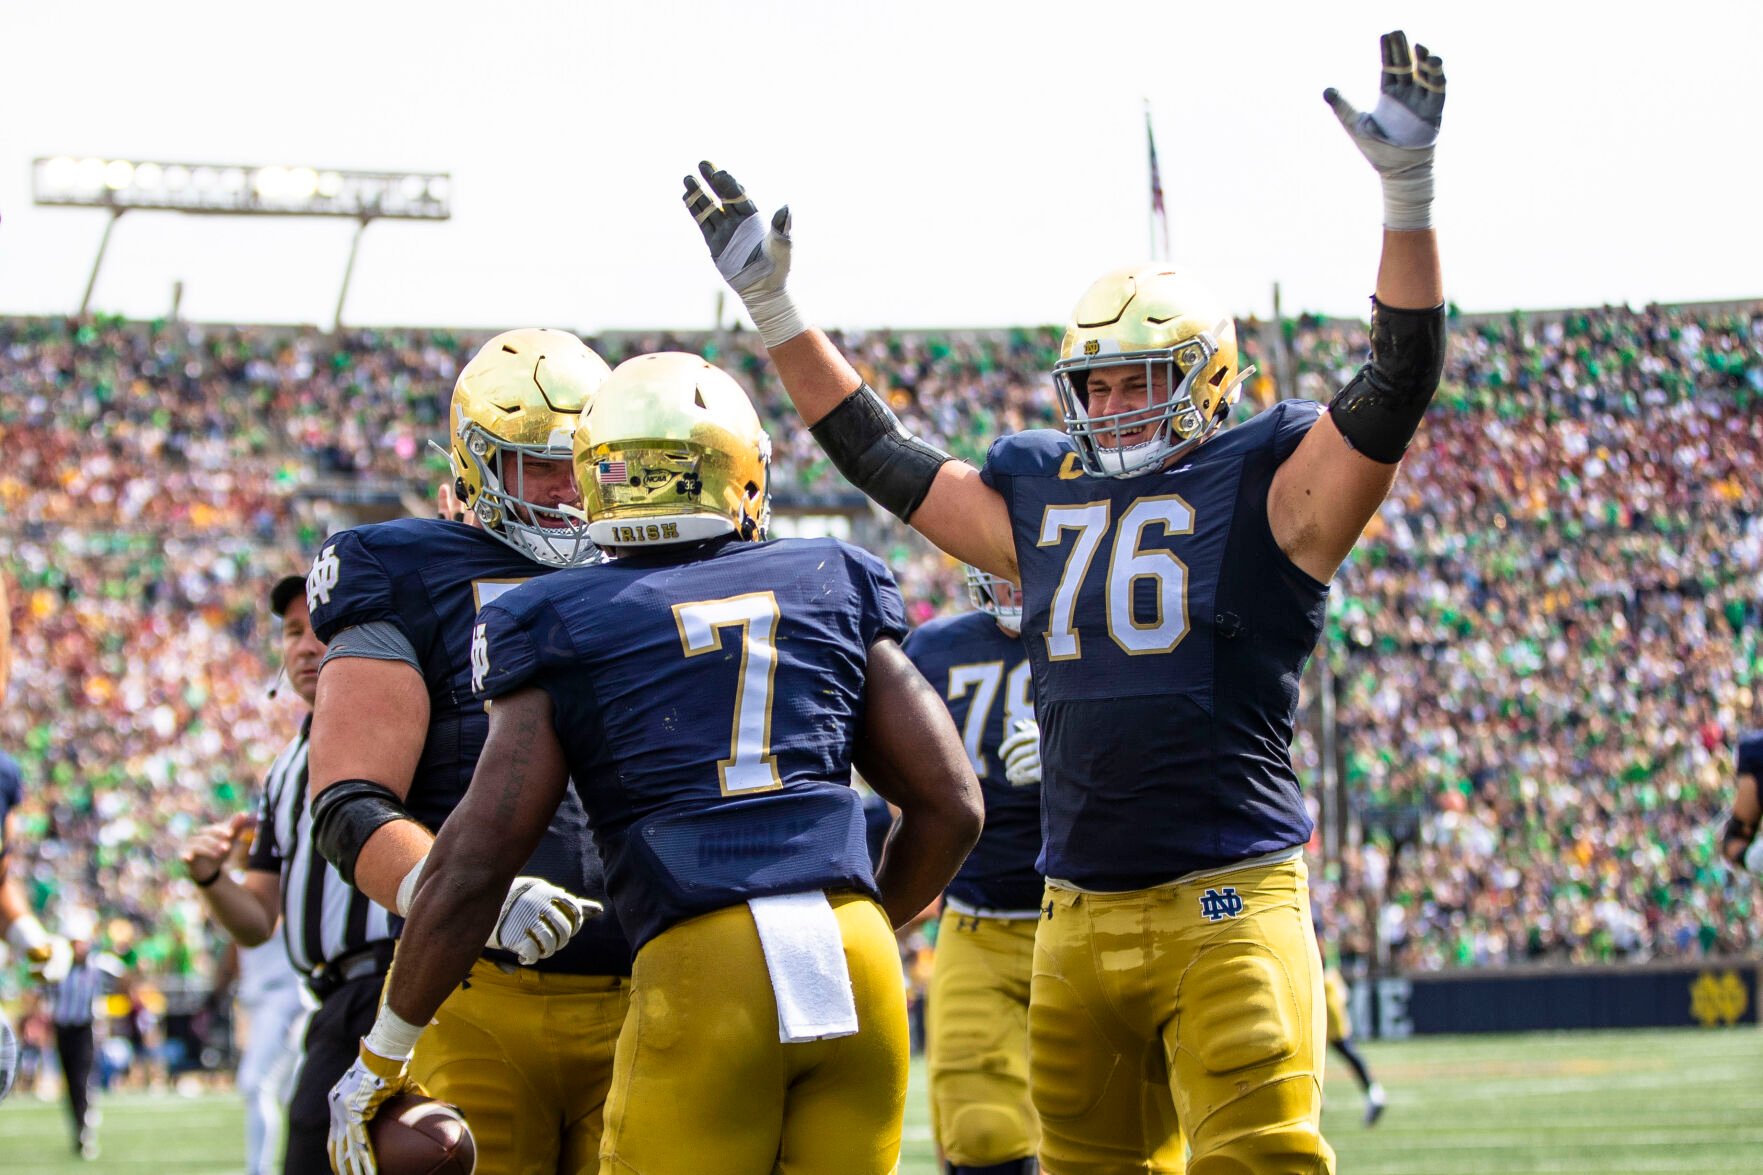 Chargers select Notre Dame offensive tackle Alt with fifth pick in NFL draft